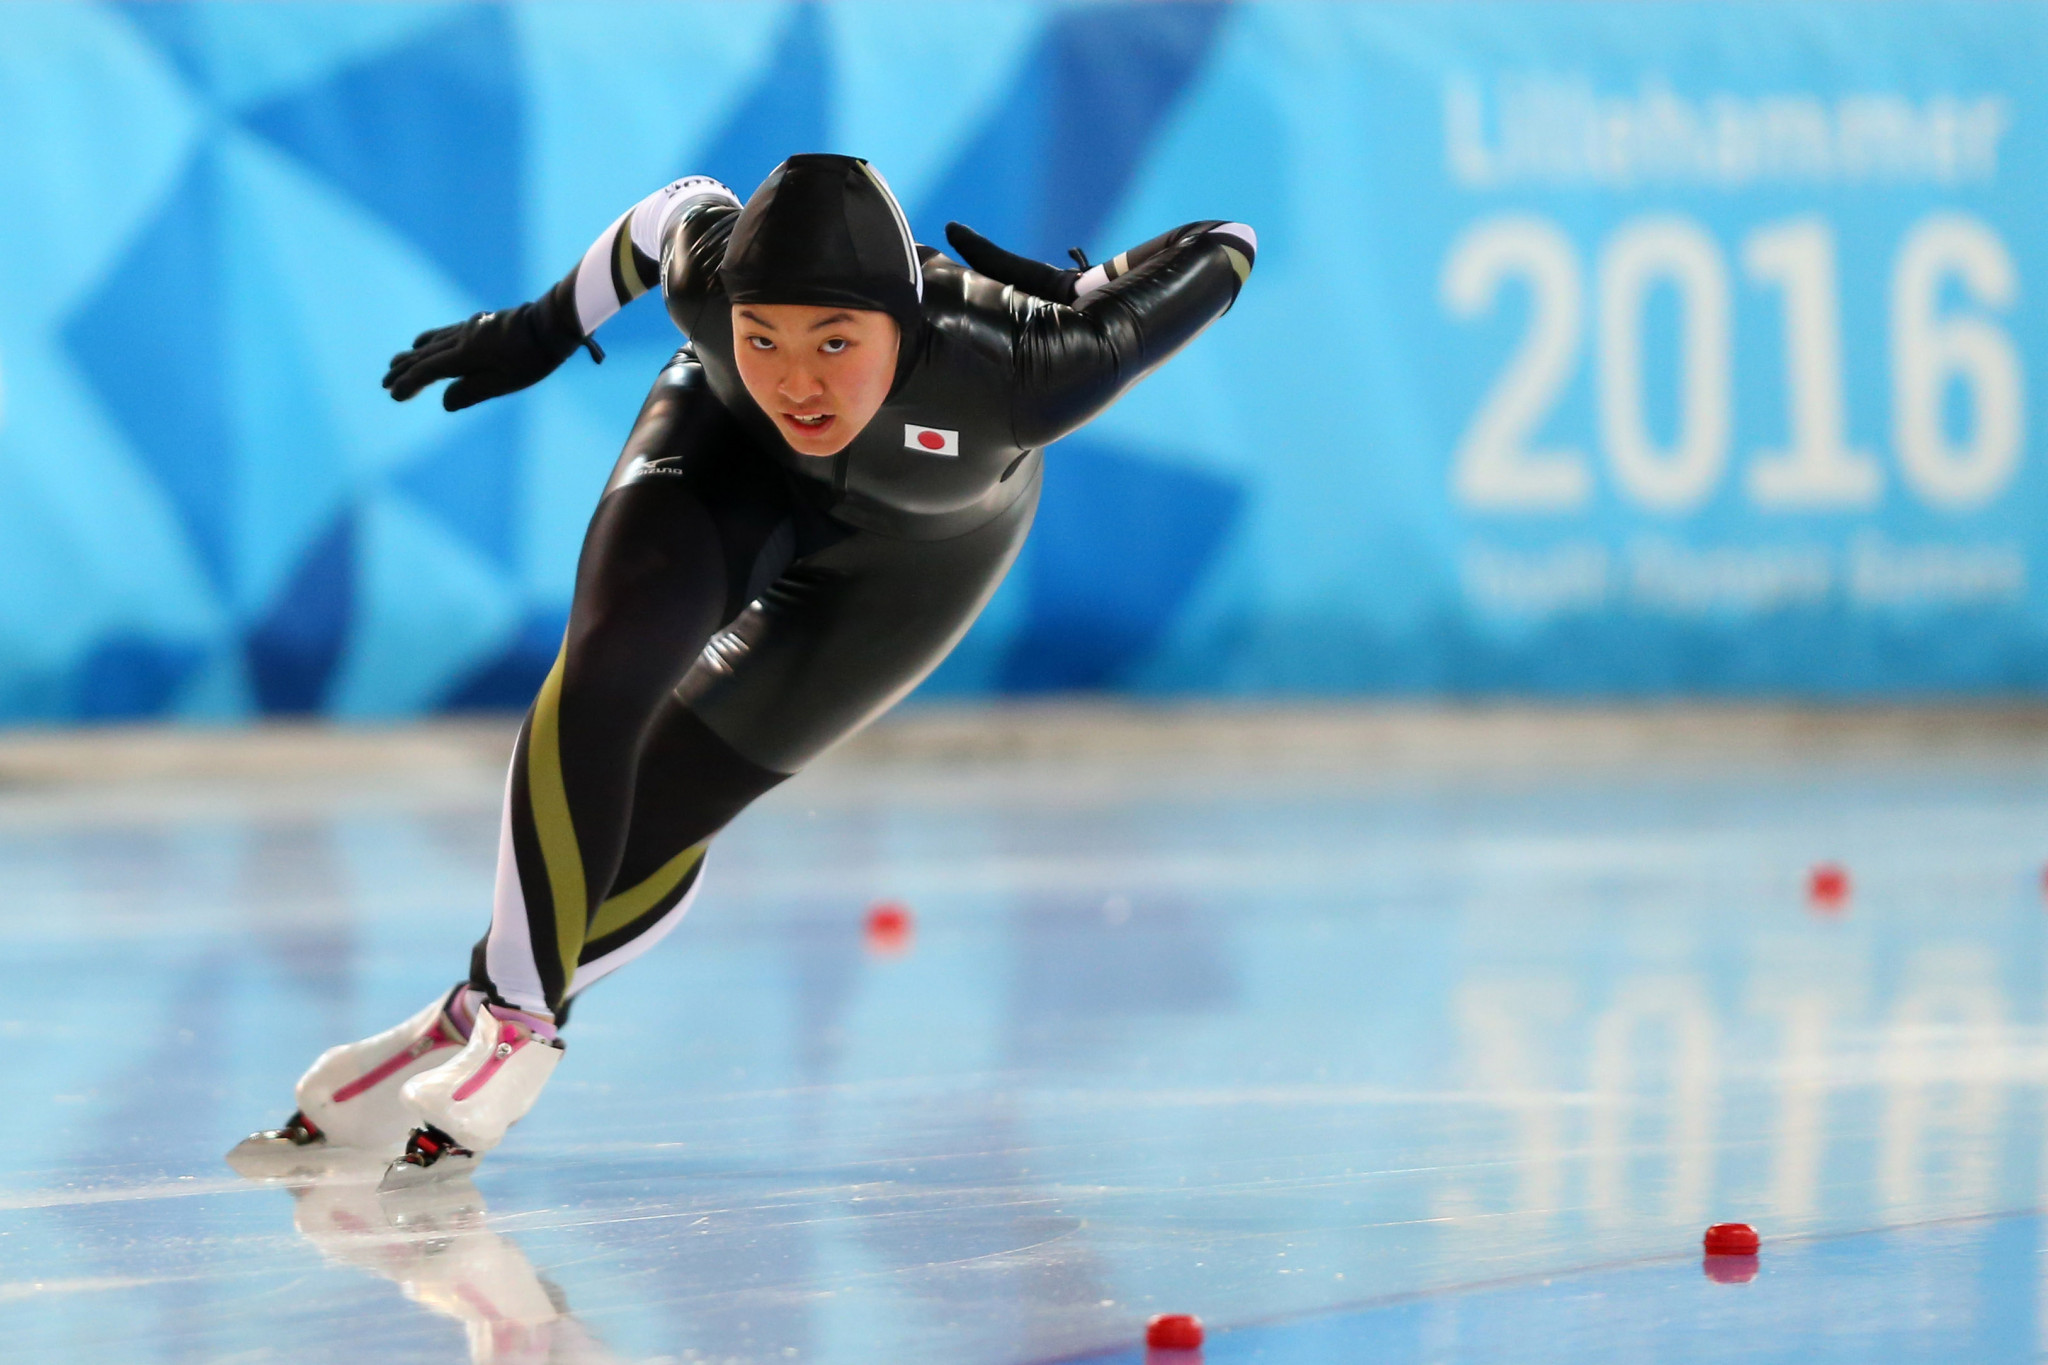 Lausanne 2020 reassures speed skaters Lake St Moritz venue sufficiently frozen for competition